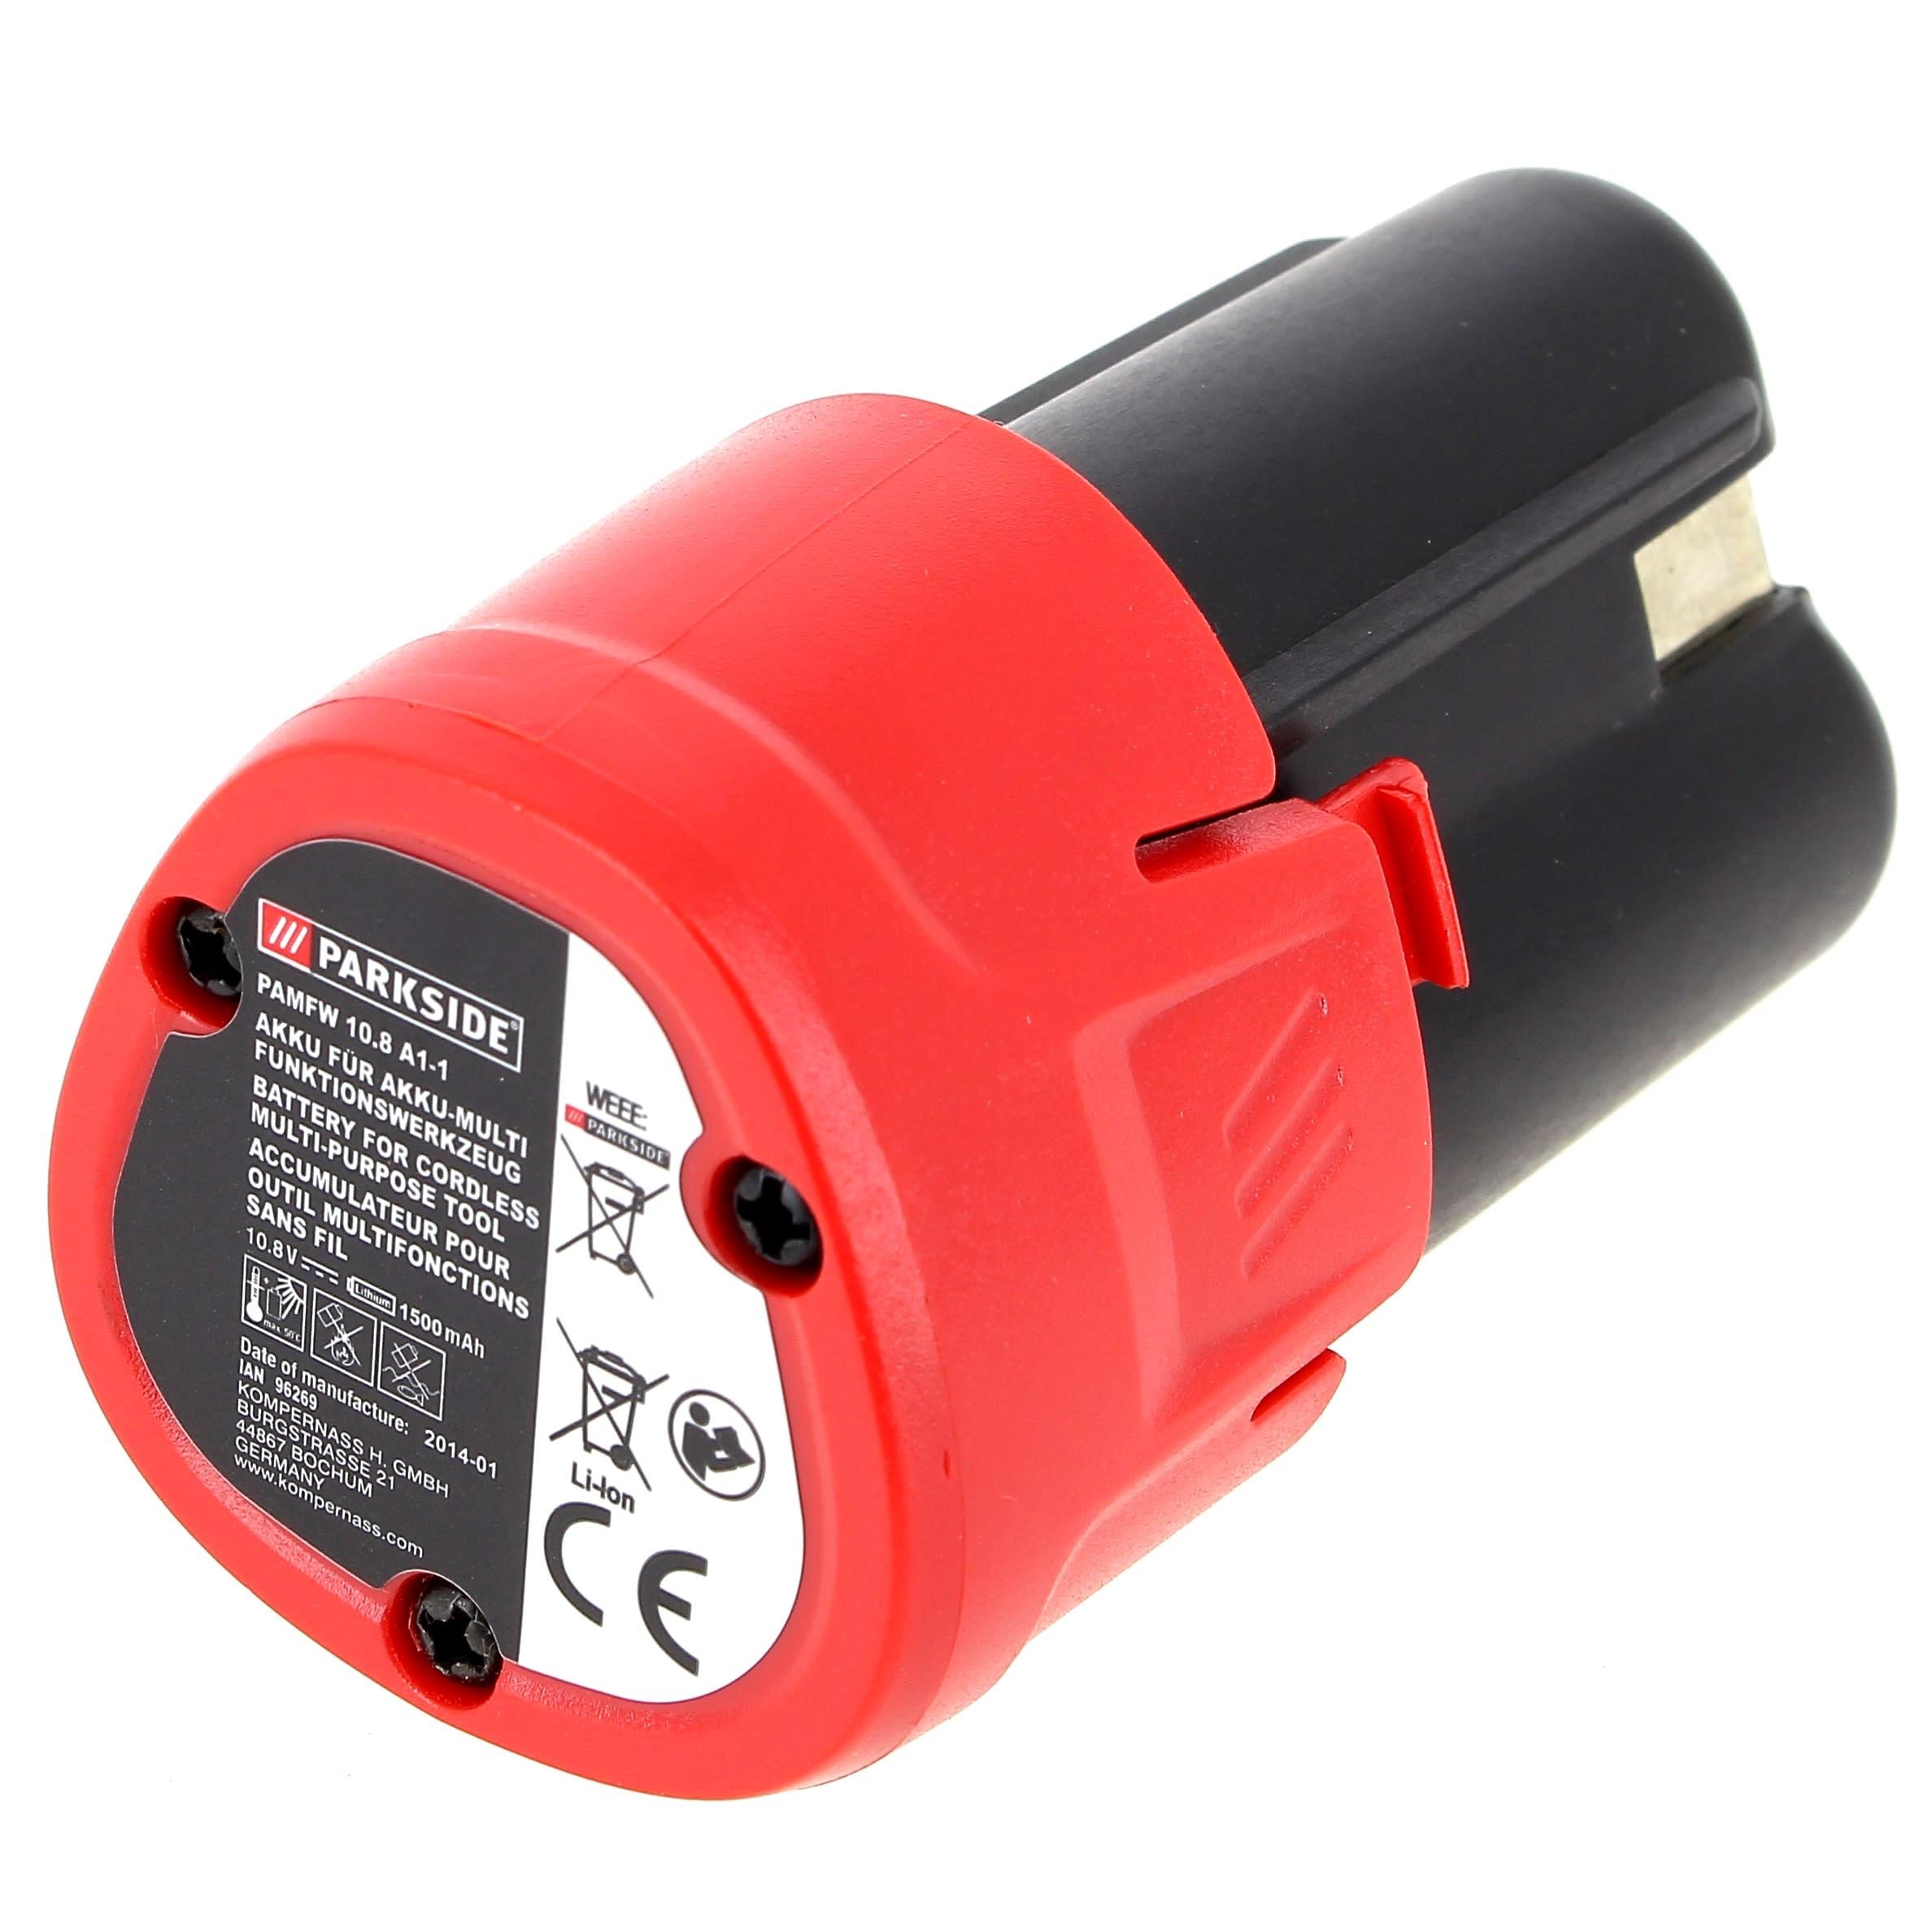 https://res.cloudinary.com/chouka/images/f_auto/v1/products/yp99h7g5ap/batterie-10-8v-1500mah-1-1